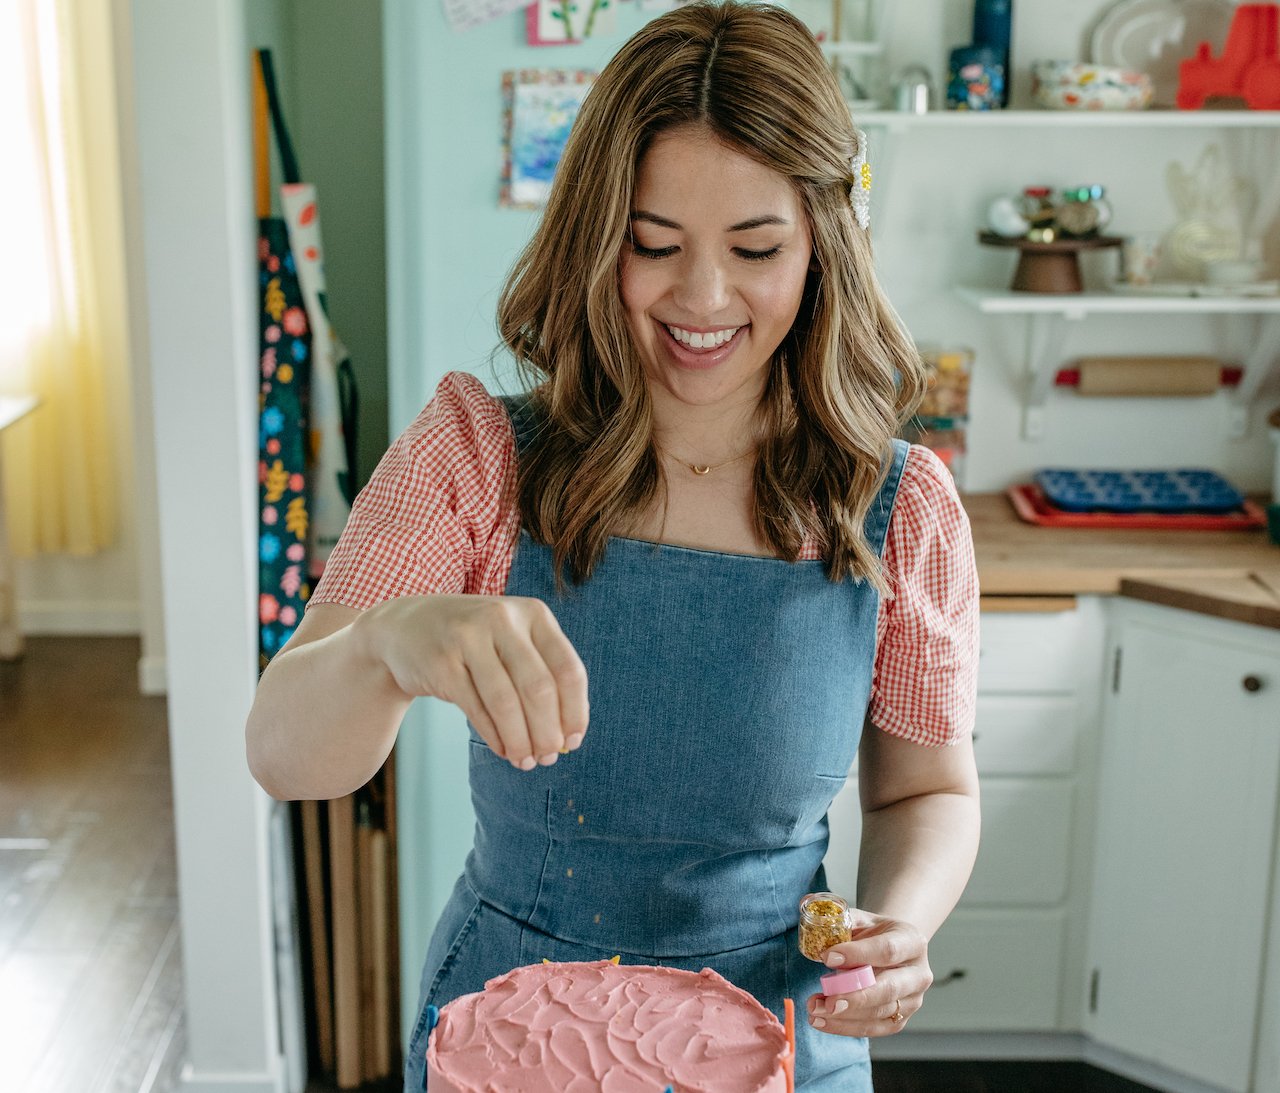 Chef Molly Yeh sprinkles a cake in a promotional photo for her new 'Girl Meets Farm' cookware line